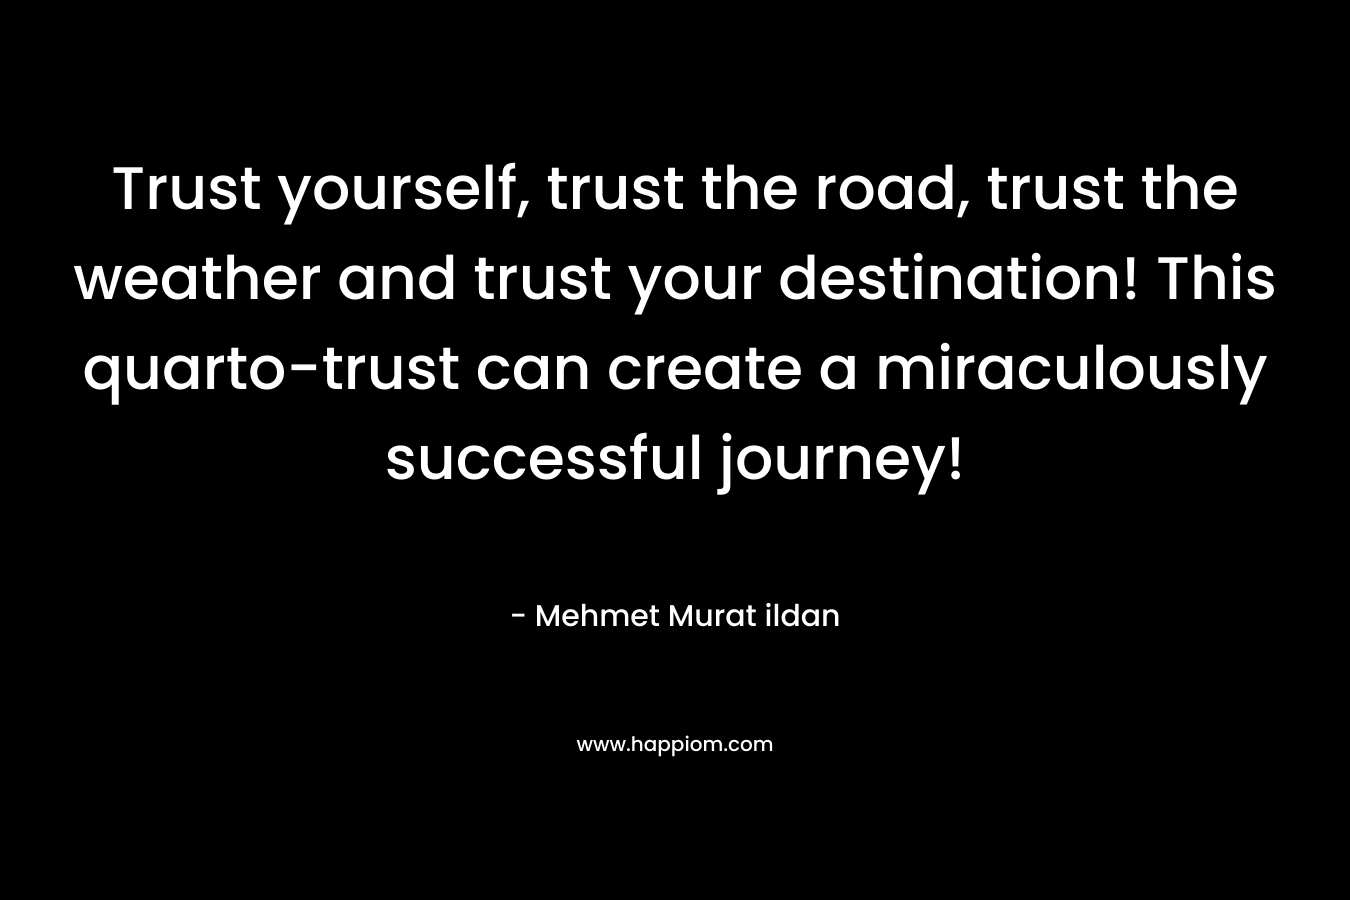 Trust yourself, trust the road, trust the weather and trust your destination! This quarto-trust can create a miraculously successful journey!